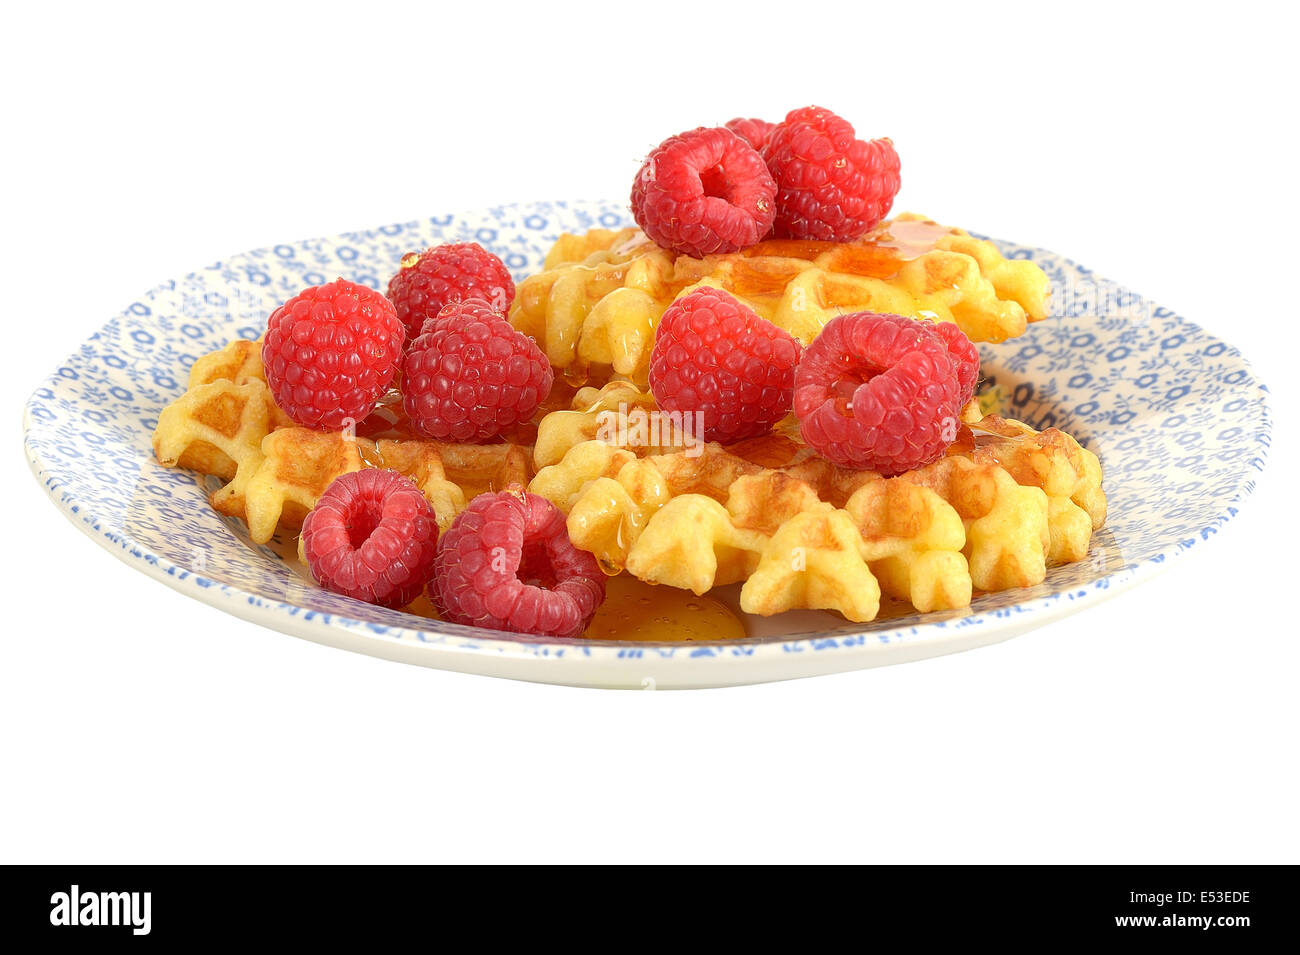 Healthy Fresh Breakfast Meal Belgian Waffles With Ripe Juicy Sweet Raspberries Isolated Against A White Background With A Clipping Path And No People Stock Photo